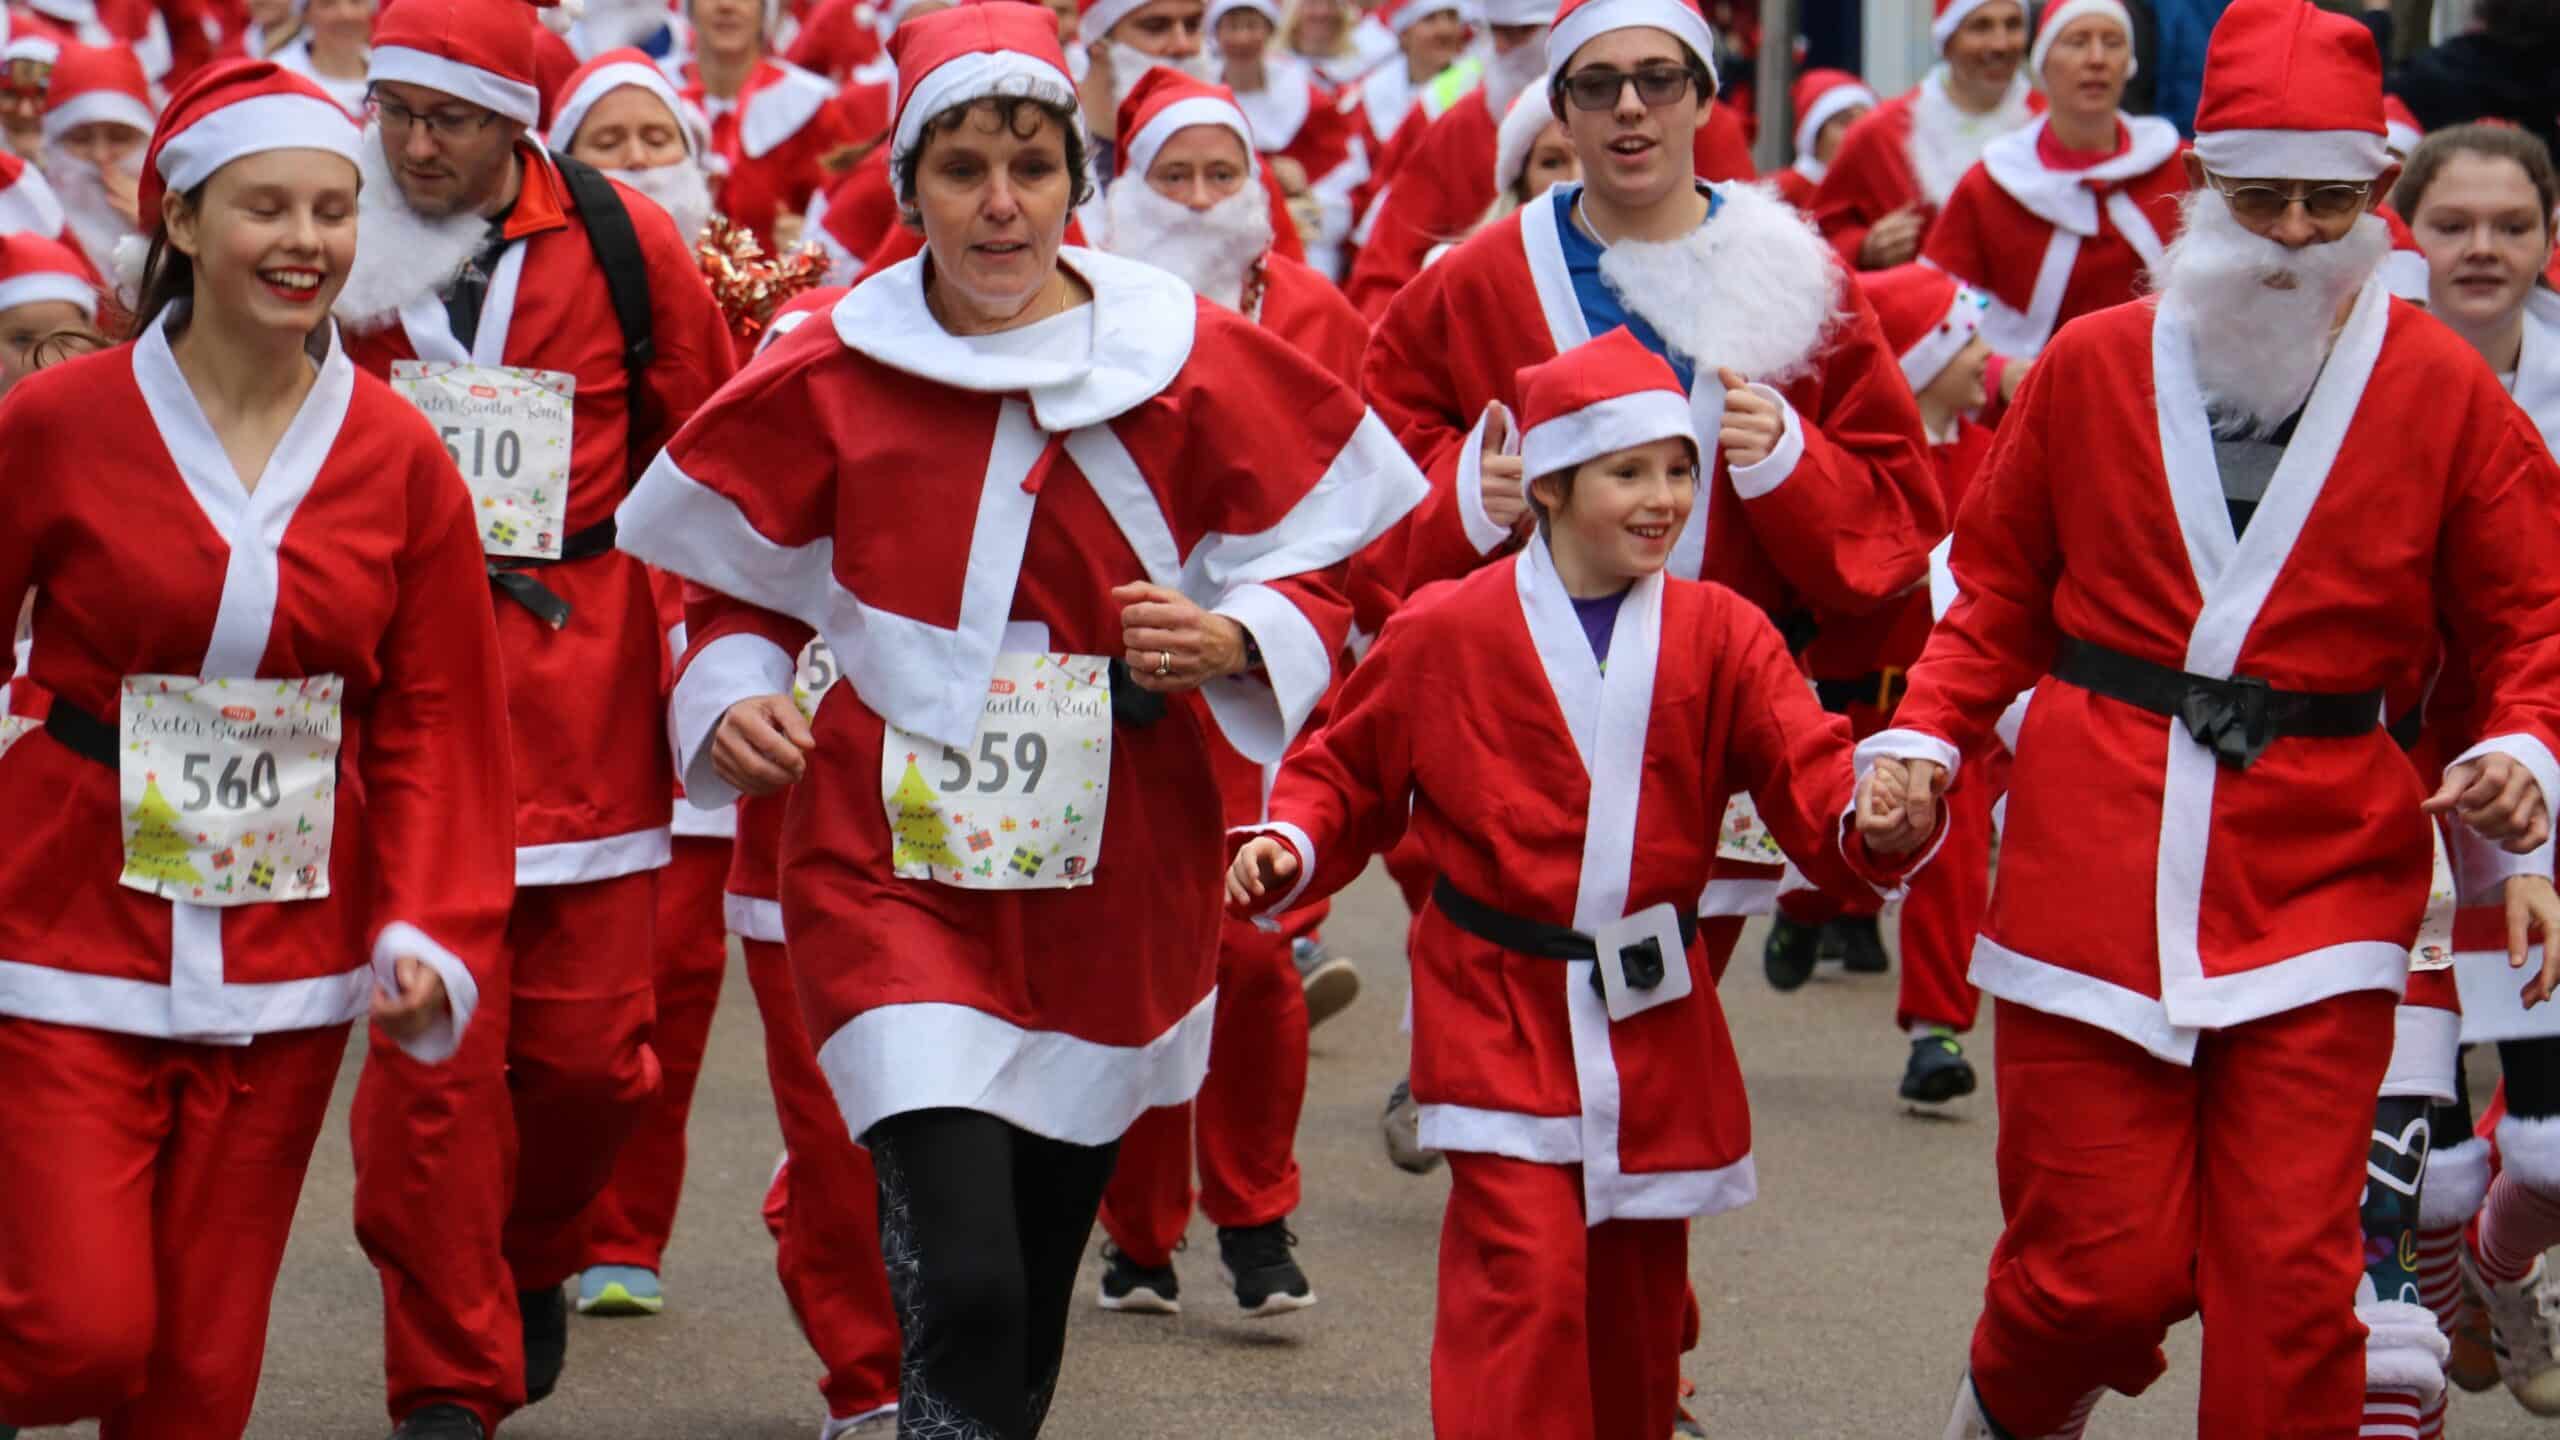 Runners in santa outfits